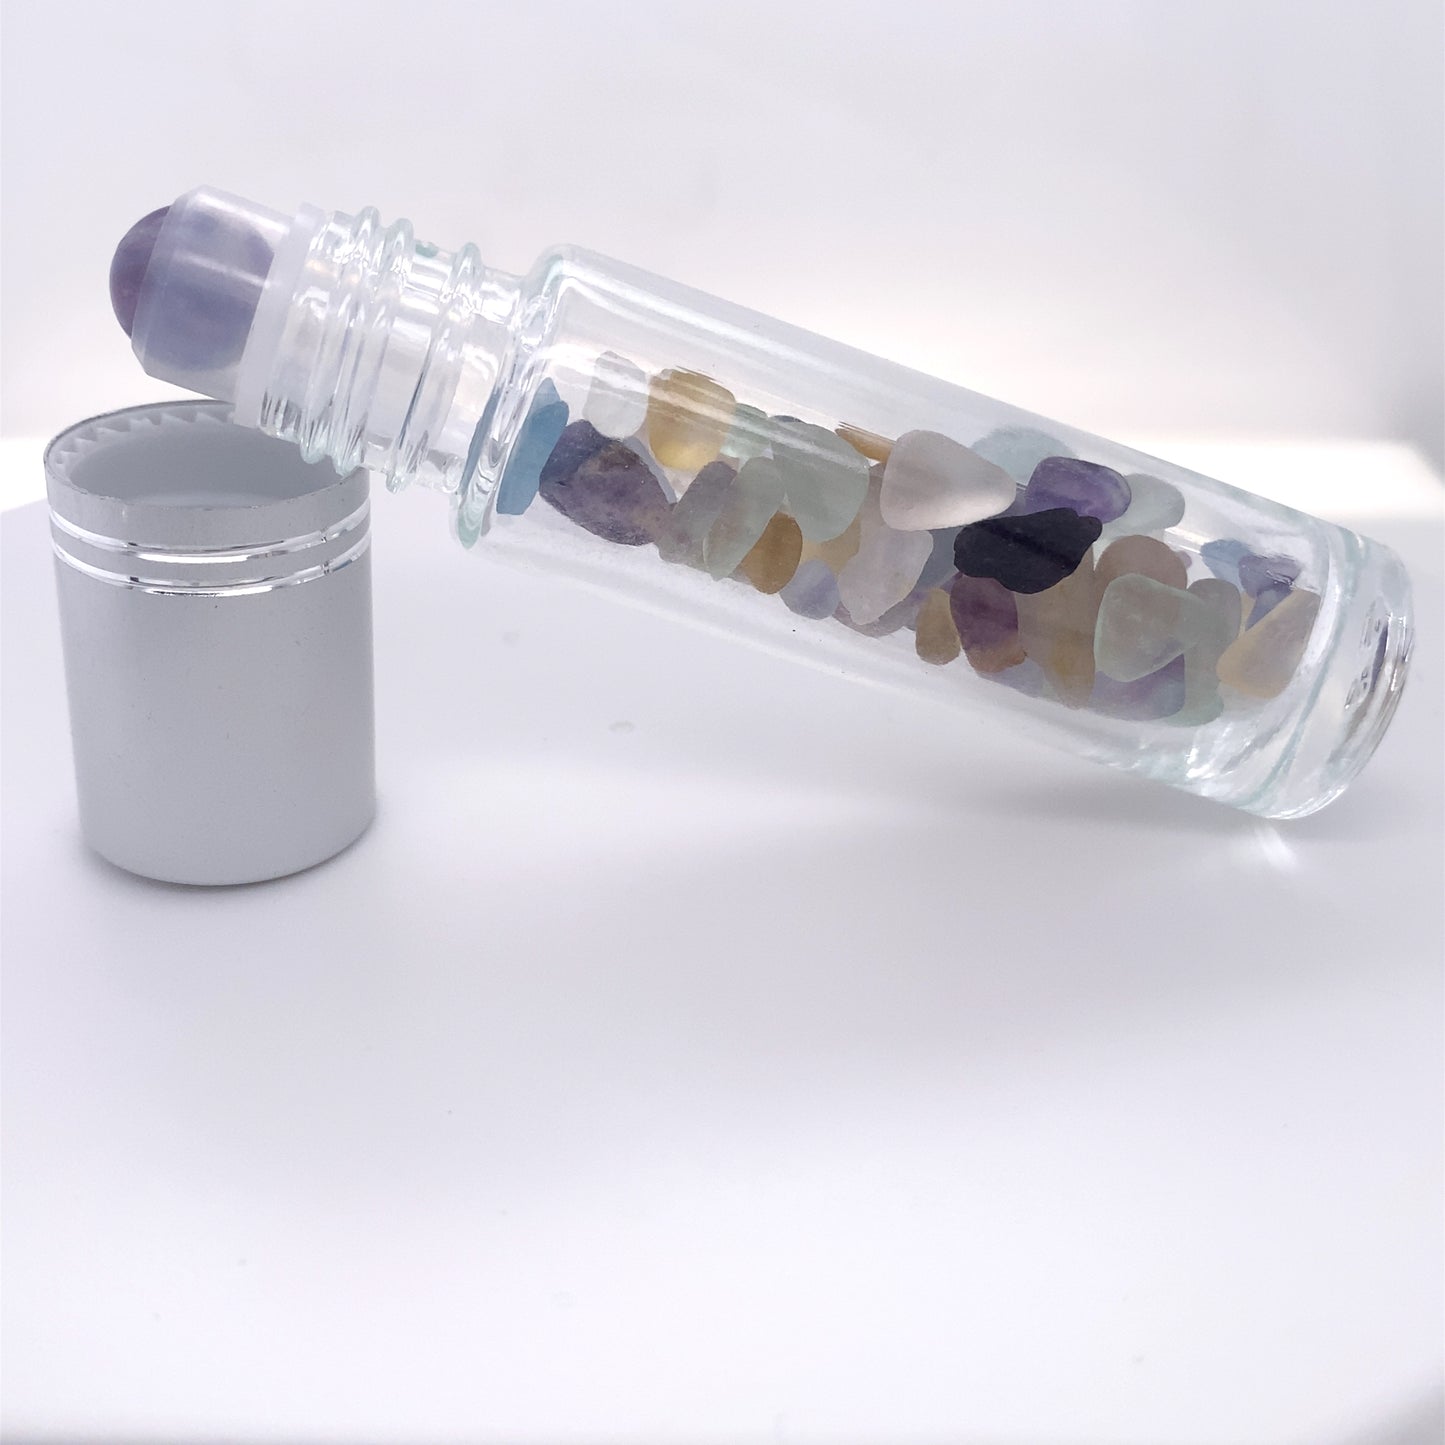 A beautiful glass bottle with stones, perfect for self-care and stone rolling, the Stone Essential Oil Roller.